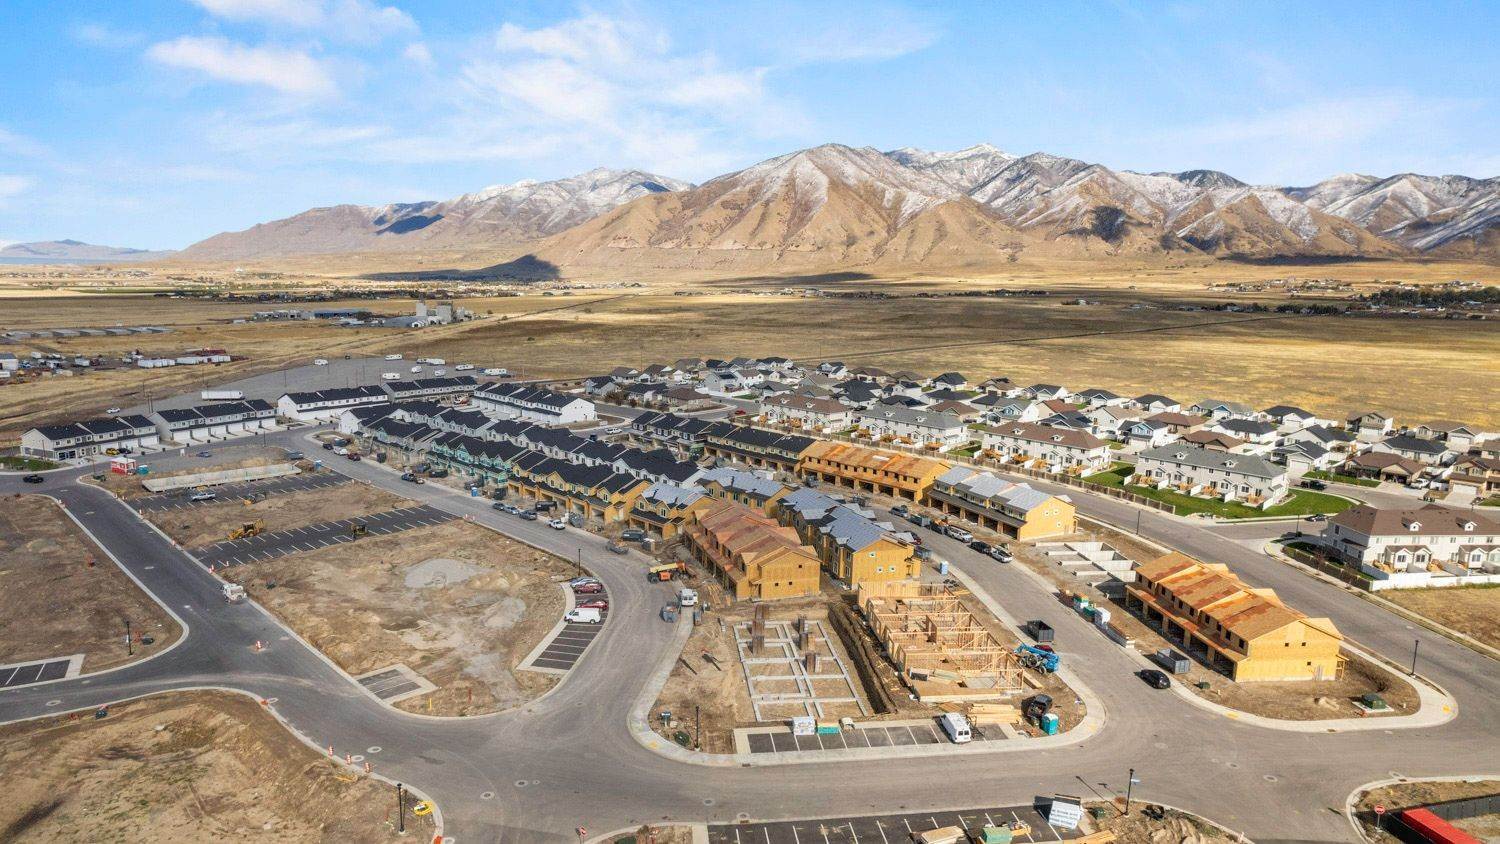 5. Western Acres xây dựng tại 259 East Serenity Avenue, Tooele, UT 84074